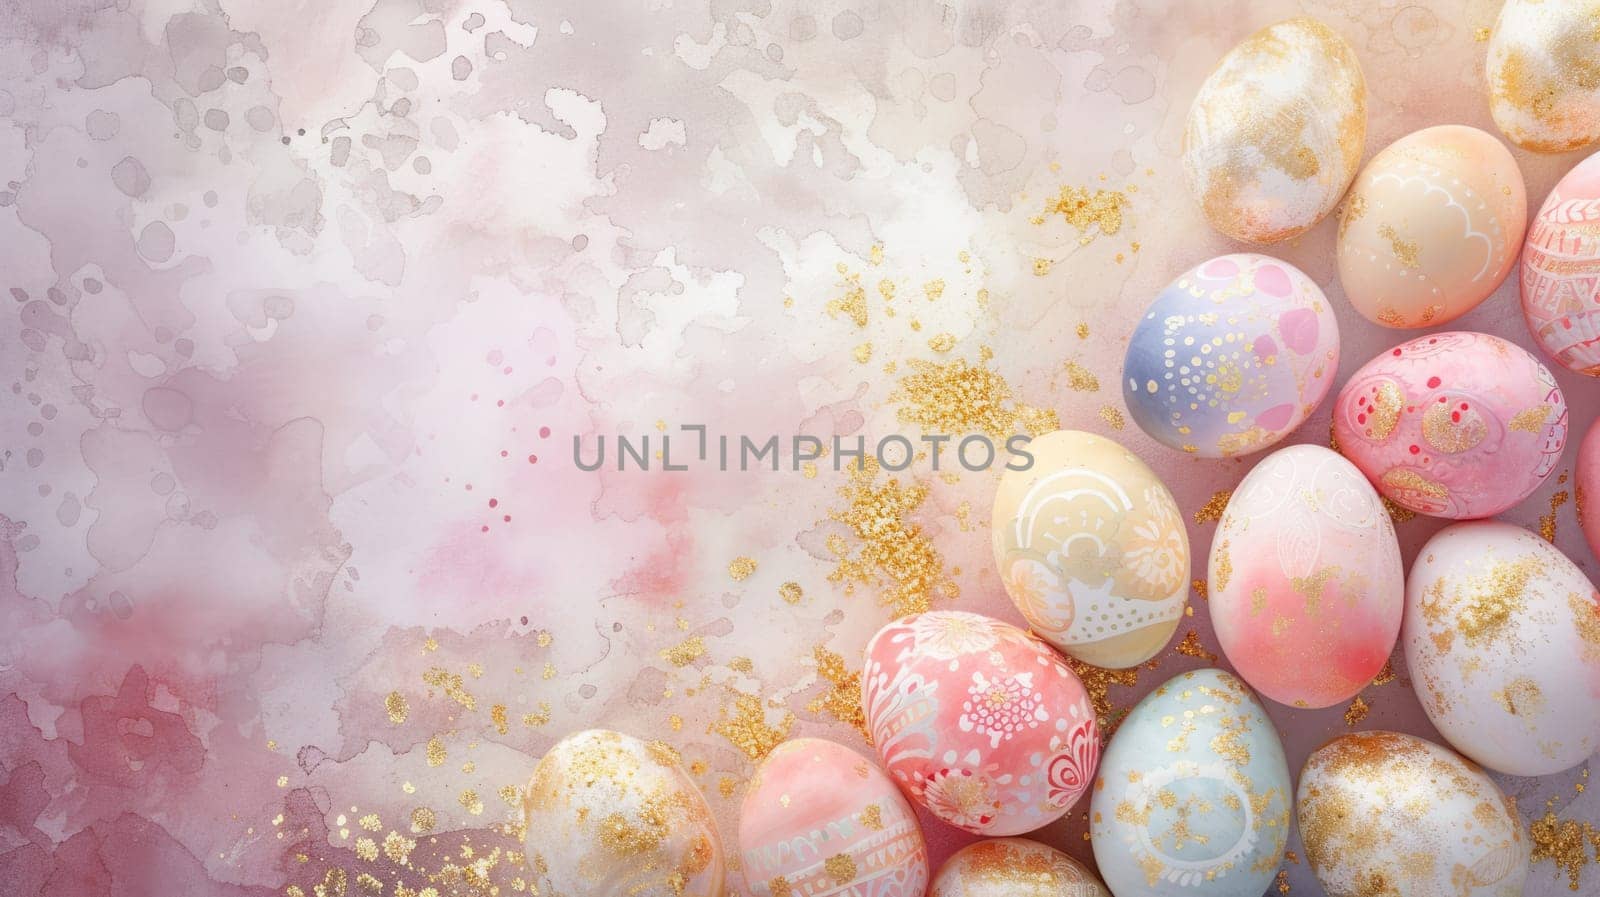 A vibrant display of colorful Easter eggs arranged in a row on a blank canvas, showcasing a beautiful pattern against a stark white background reminiscent of a piece of art AIG42E